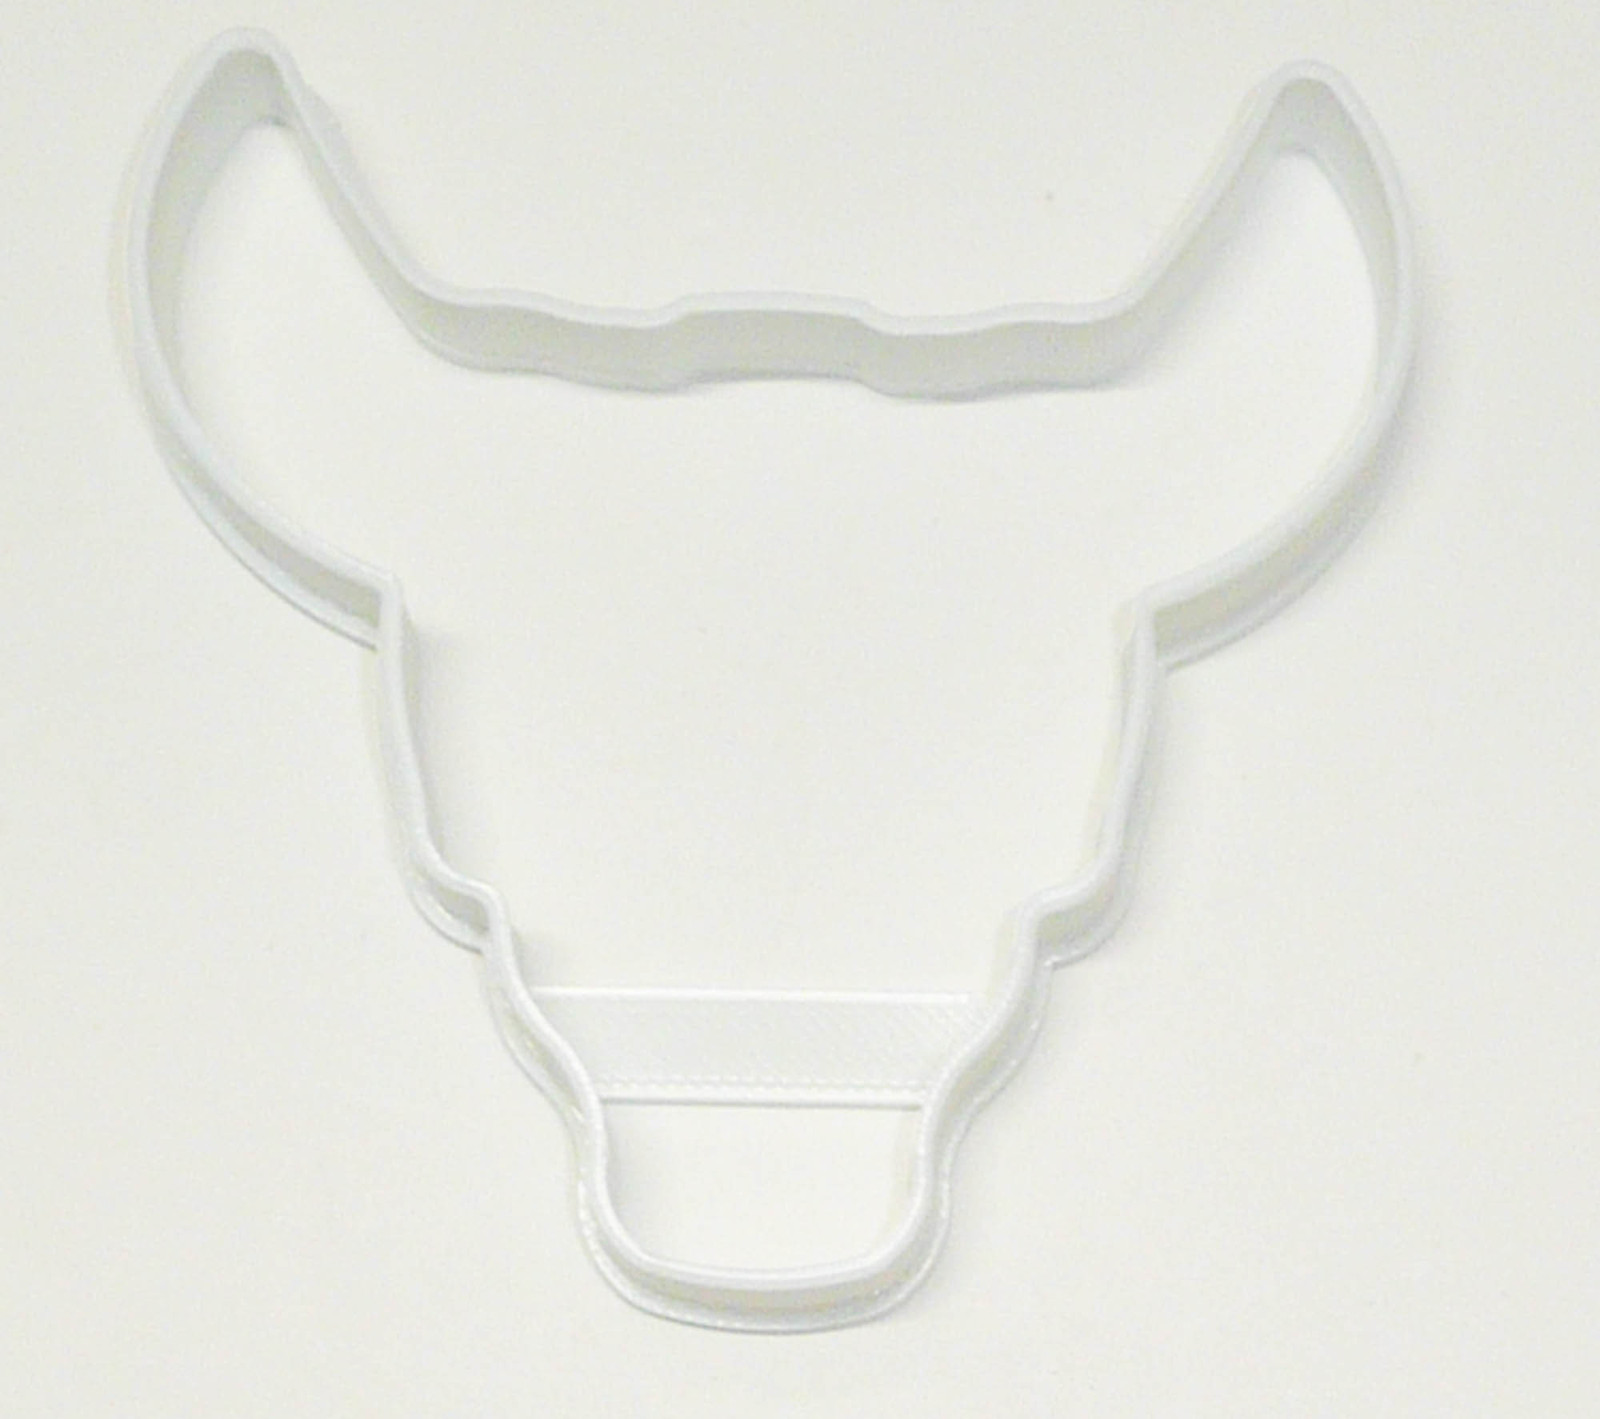 Cow Skull Outline Tattoo Symbol Protection Courage Cookie Cutter USA PR3389